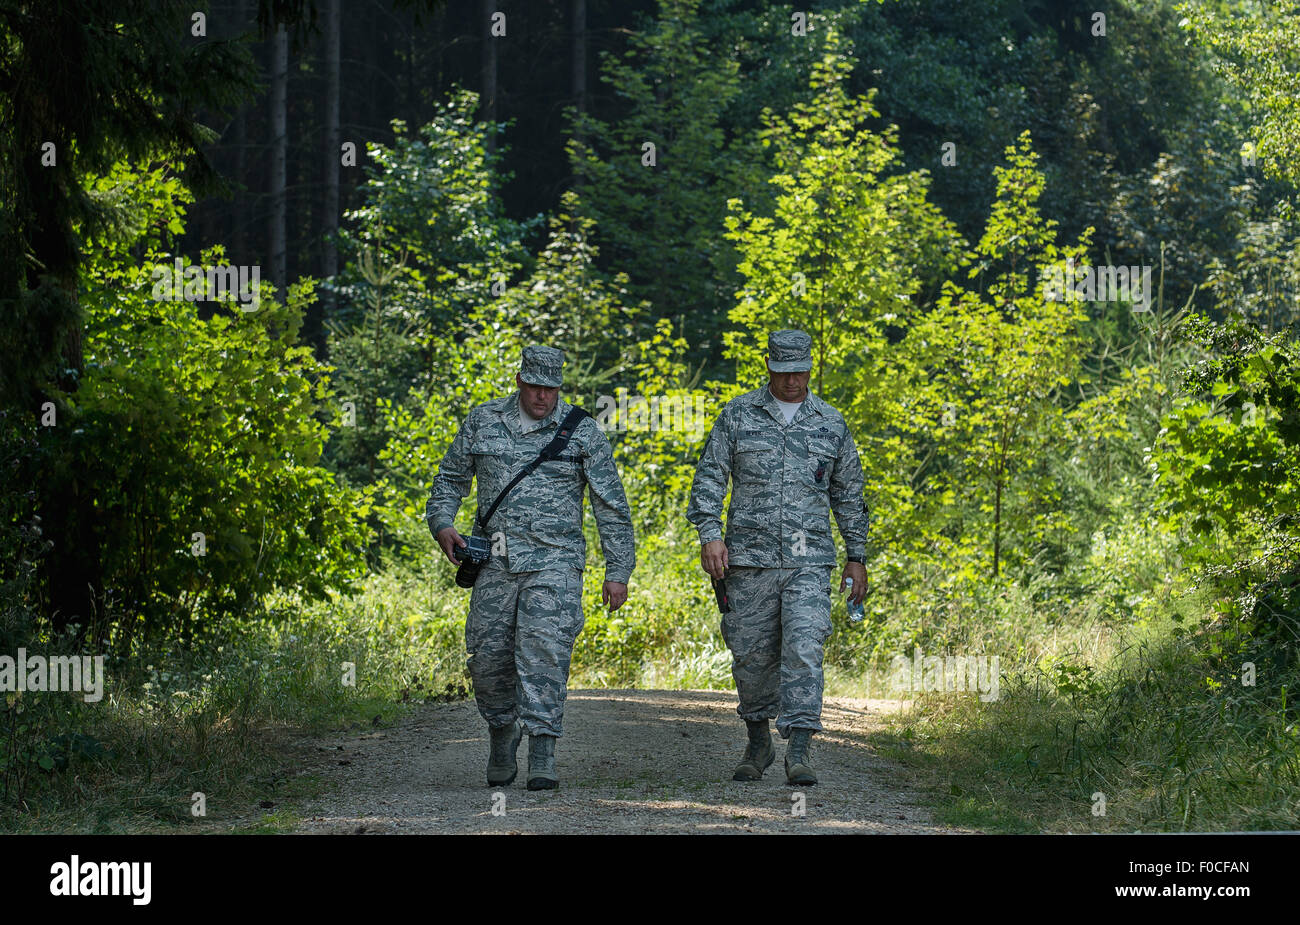 Engelmannsreuth, Germany. 12th Aug, 2015. Two soldiers of the US armed forces walk in a forest in the aftermath of a crashed plane near Engelmannsreuth, Germany, 12 August 2015. A US Air Force F-16 crashed near Engelmannsreuth, Germany, on 11 August 2015. Rescue operations are still taking place. Photo: NICOLAS ARMER/dpa/Alamy Live News Stock Photo